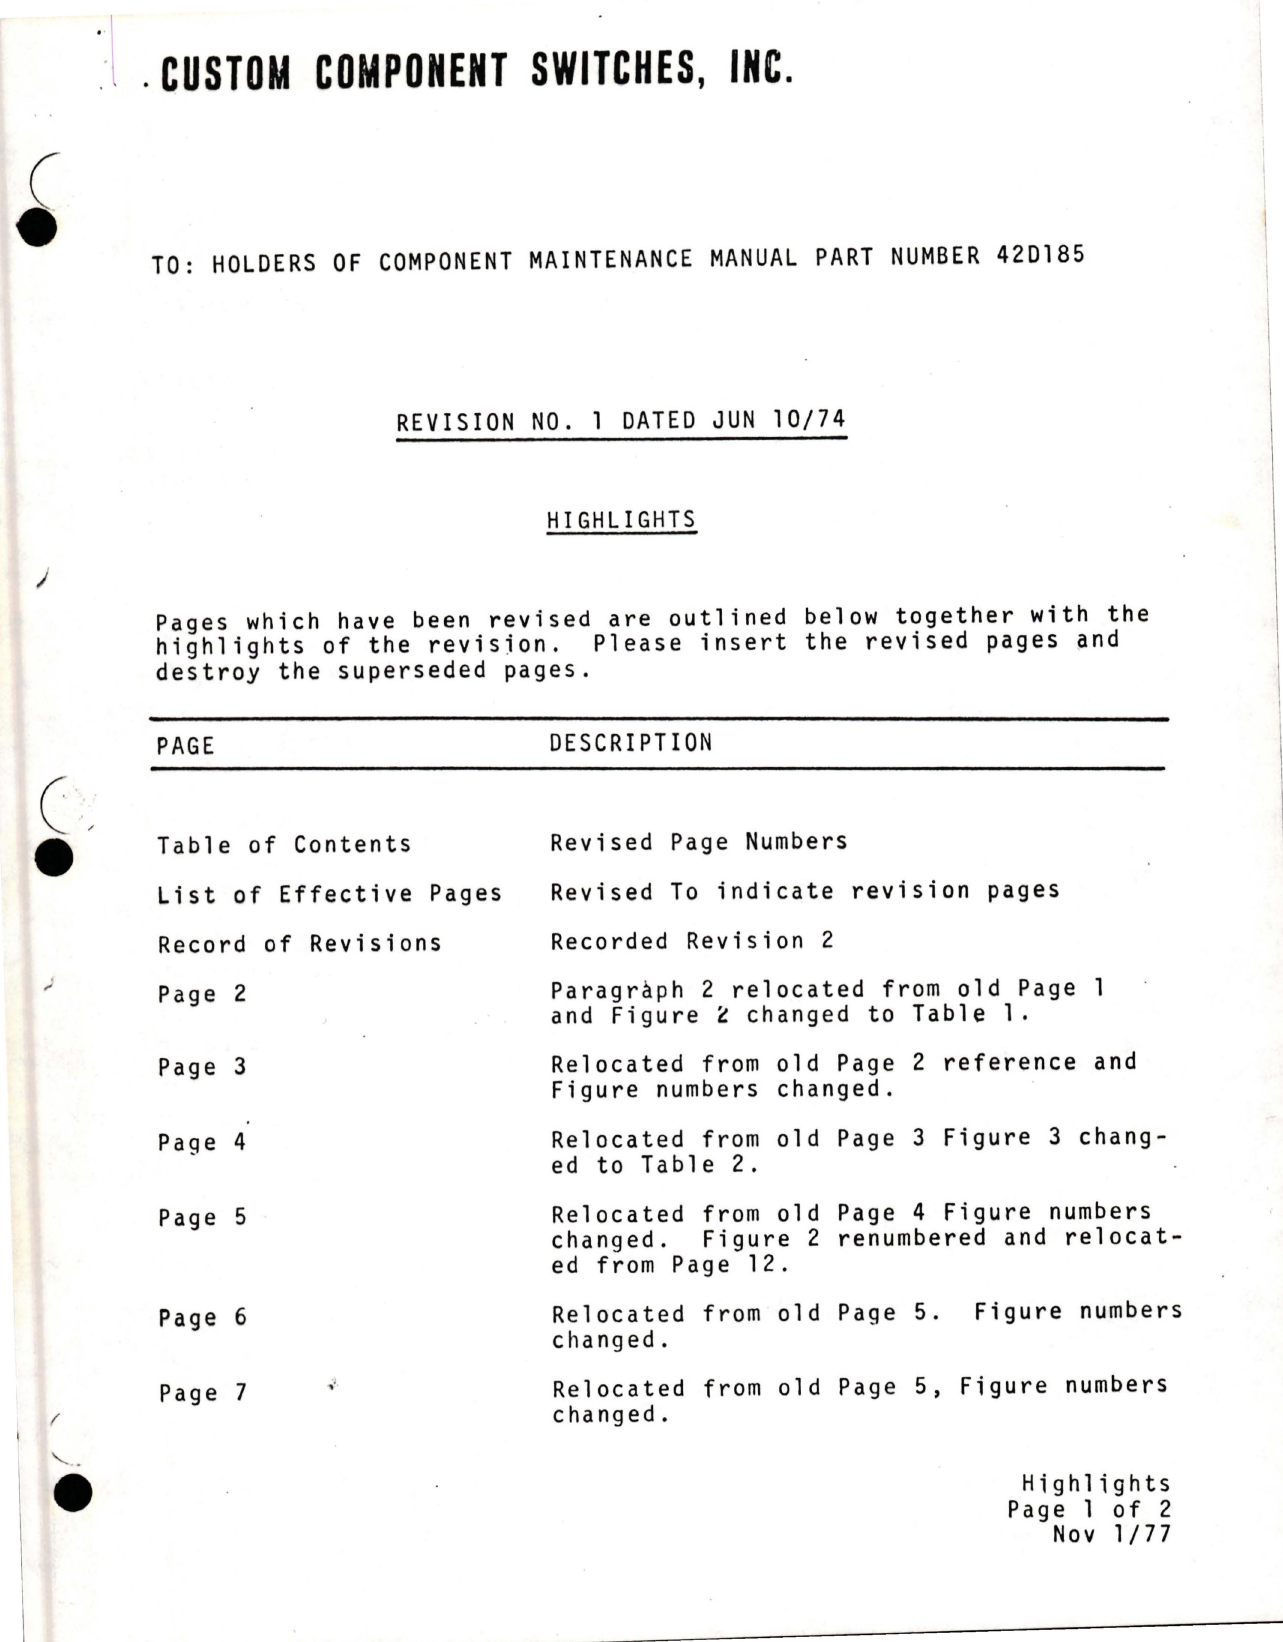 Sample page 1 from AirCorps Library document: Maintenance Manual for Pressure Switch - Part 42D185 